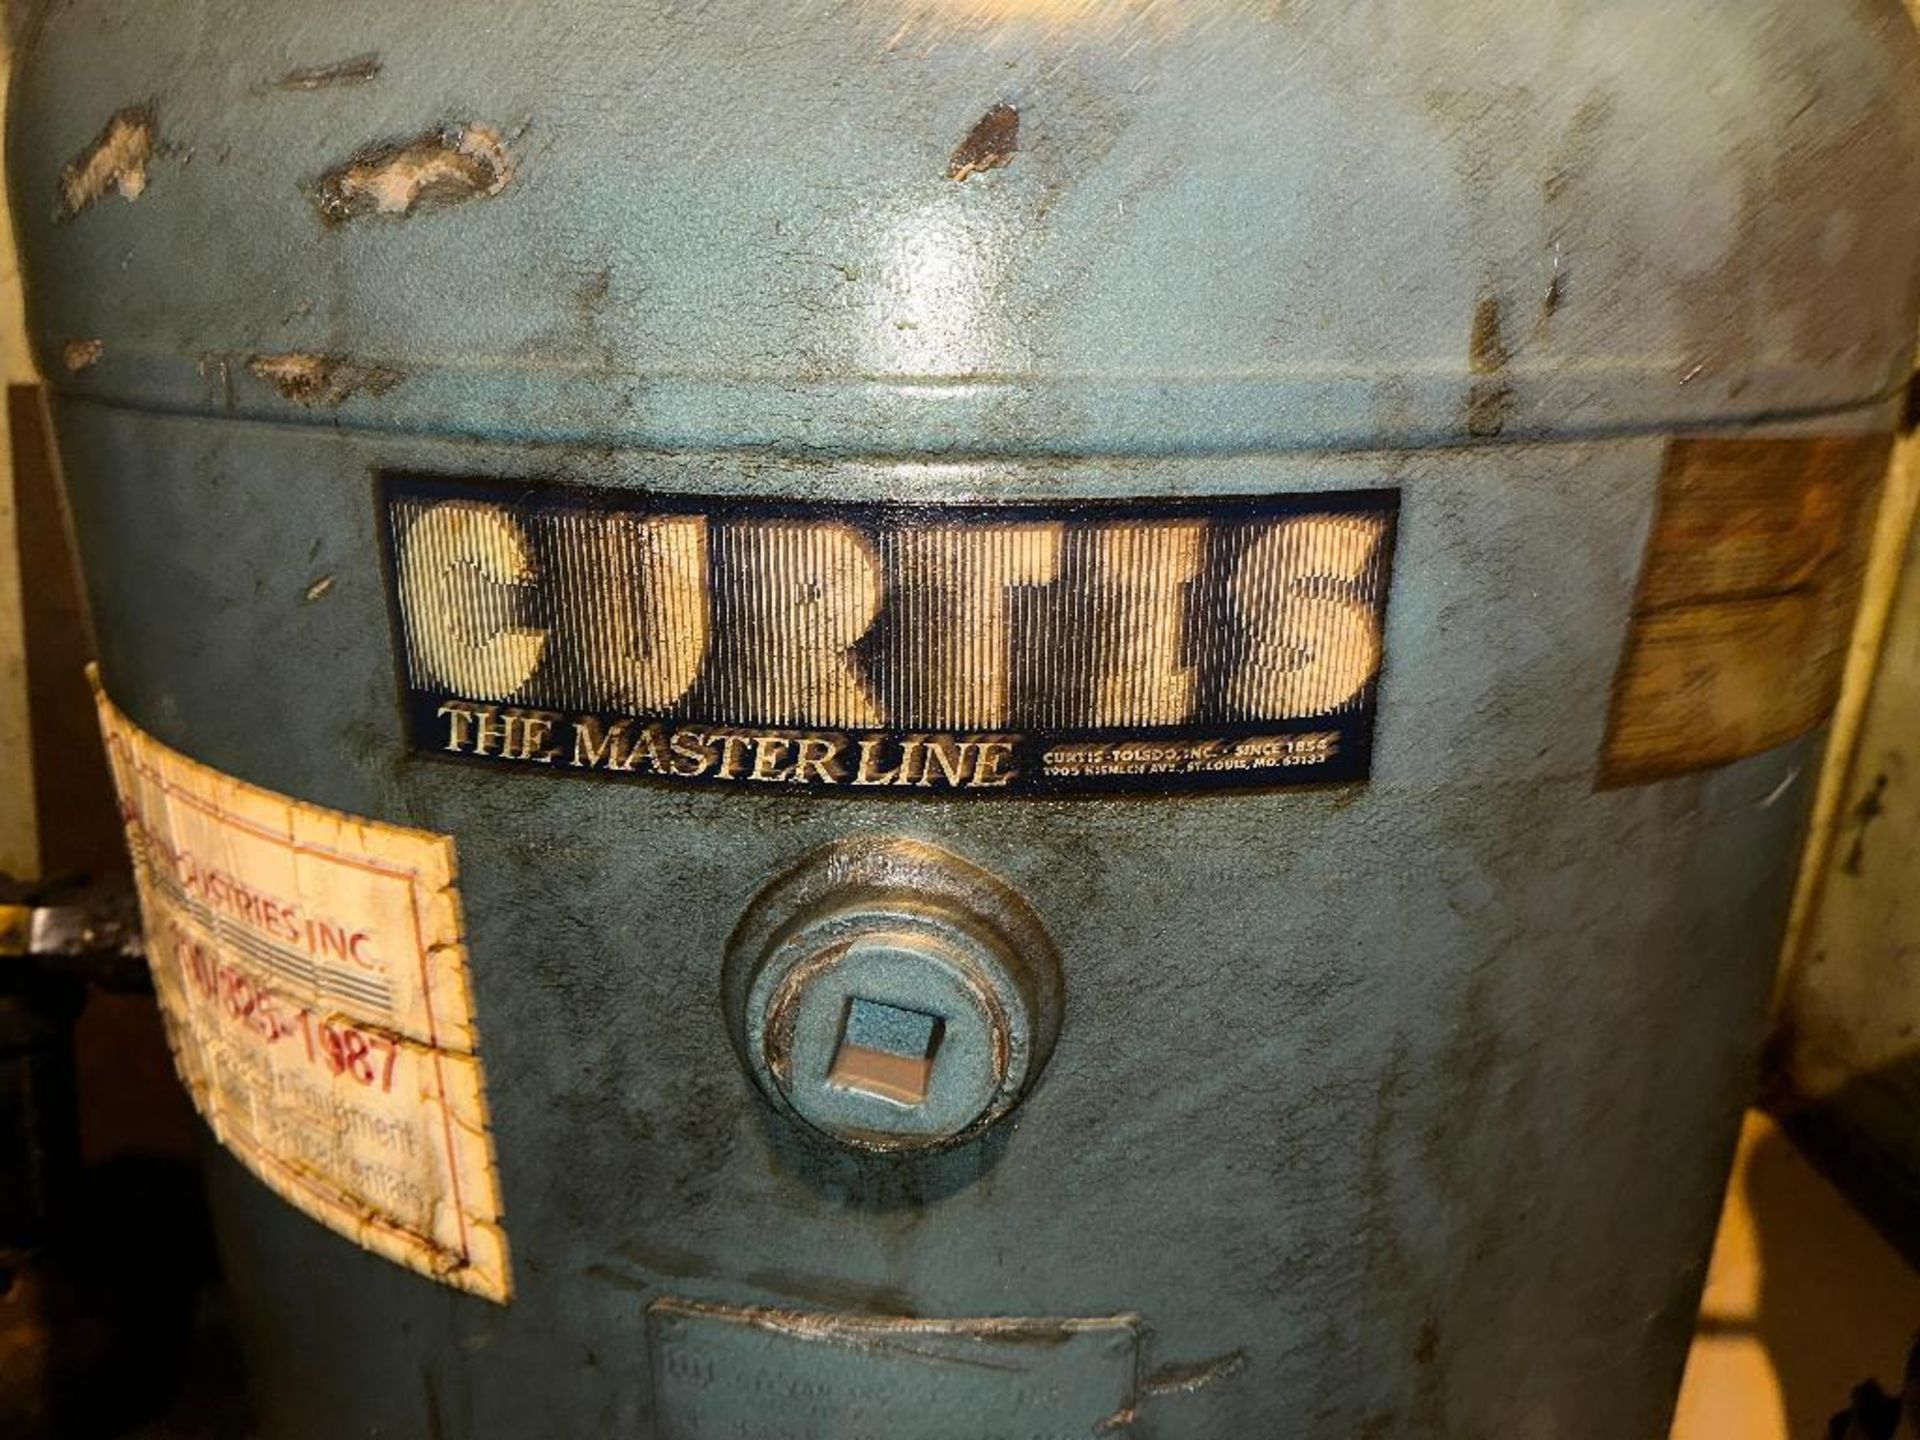 DESCRIPTION: CURTIS 80 GALLON 2 STAGE AIR COMPRESSOR BRAND / MODEL: CURTIS W325-1987 ADDITIONAL INFO - Image 3 of 3